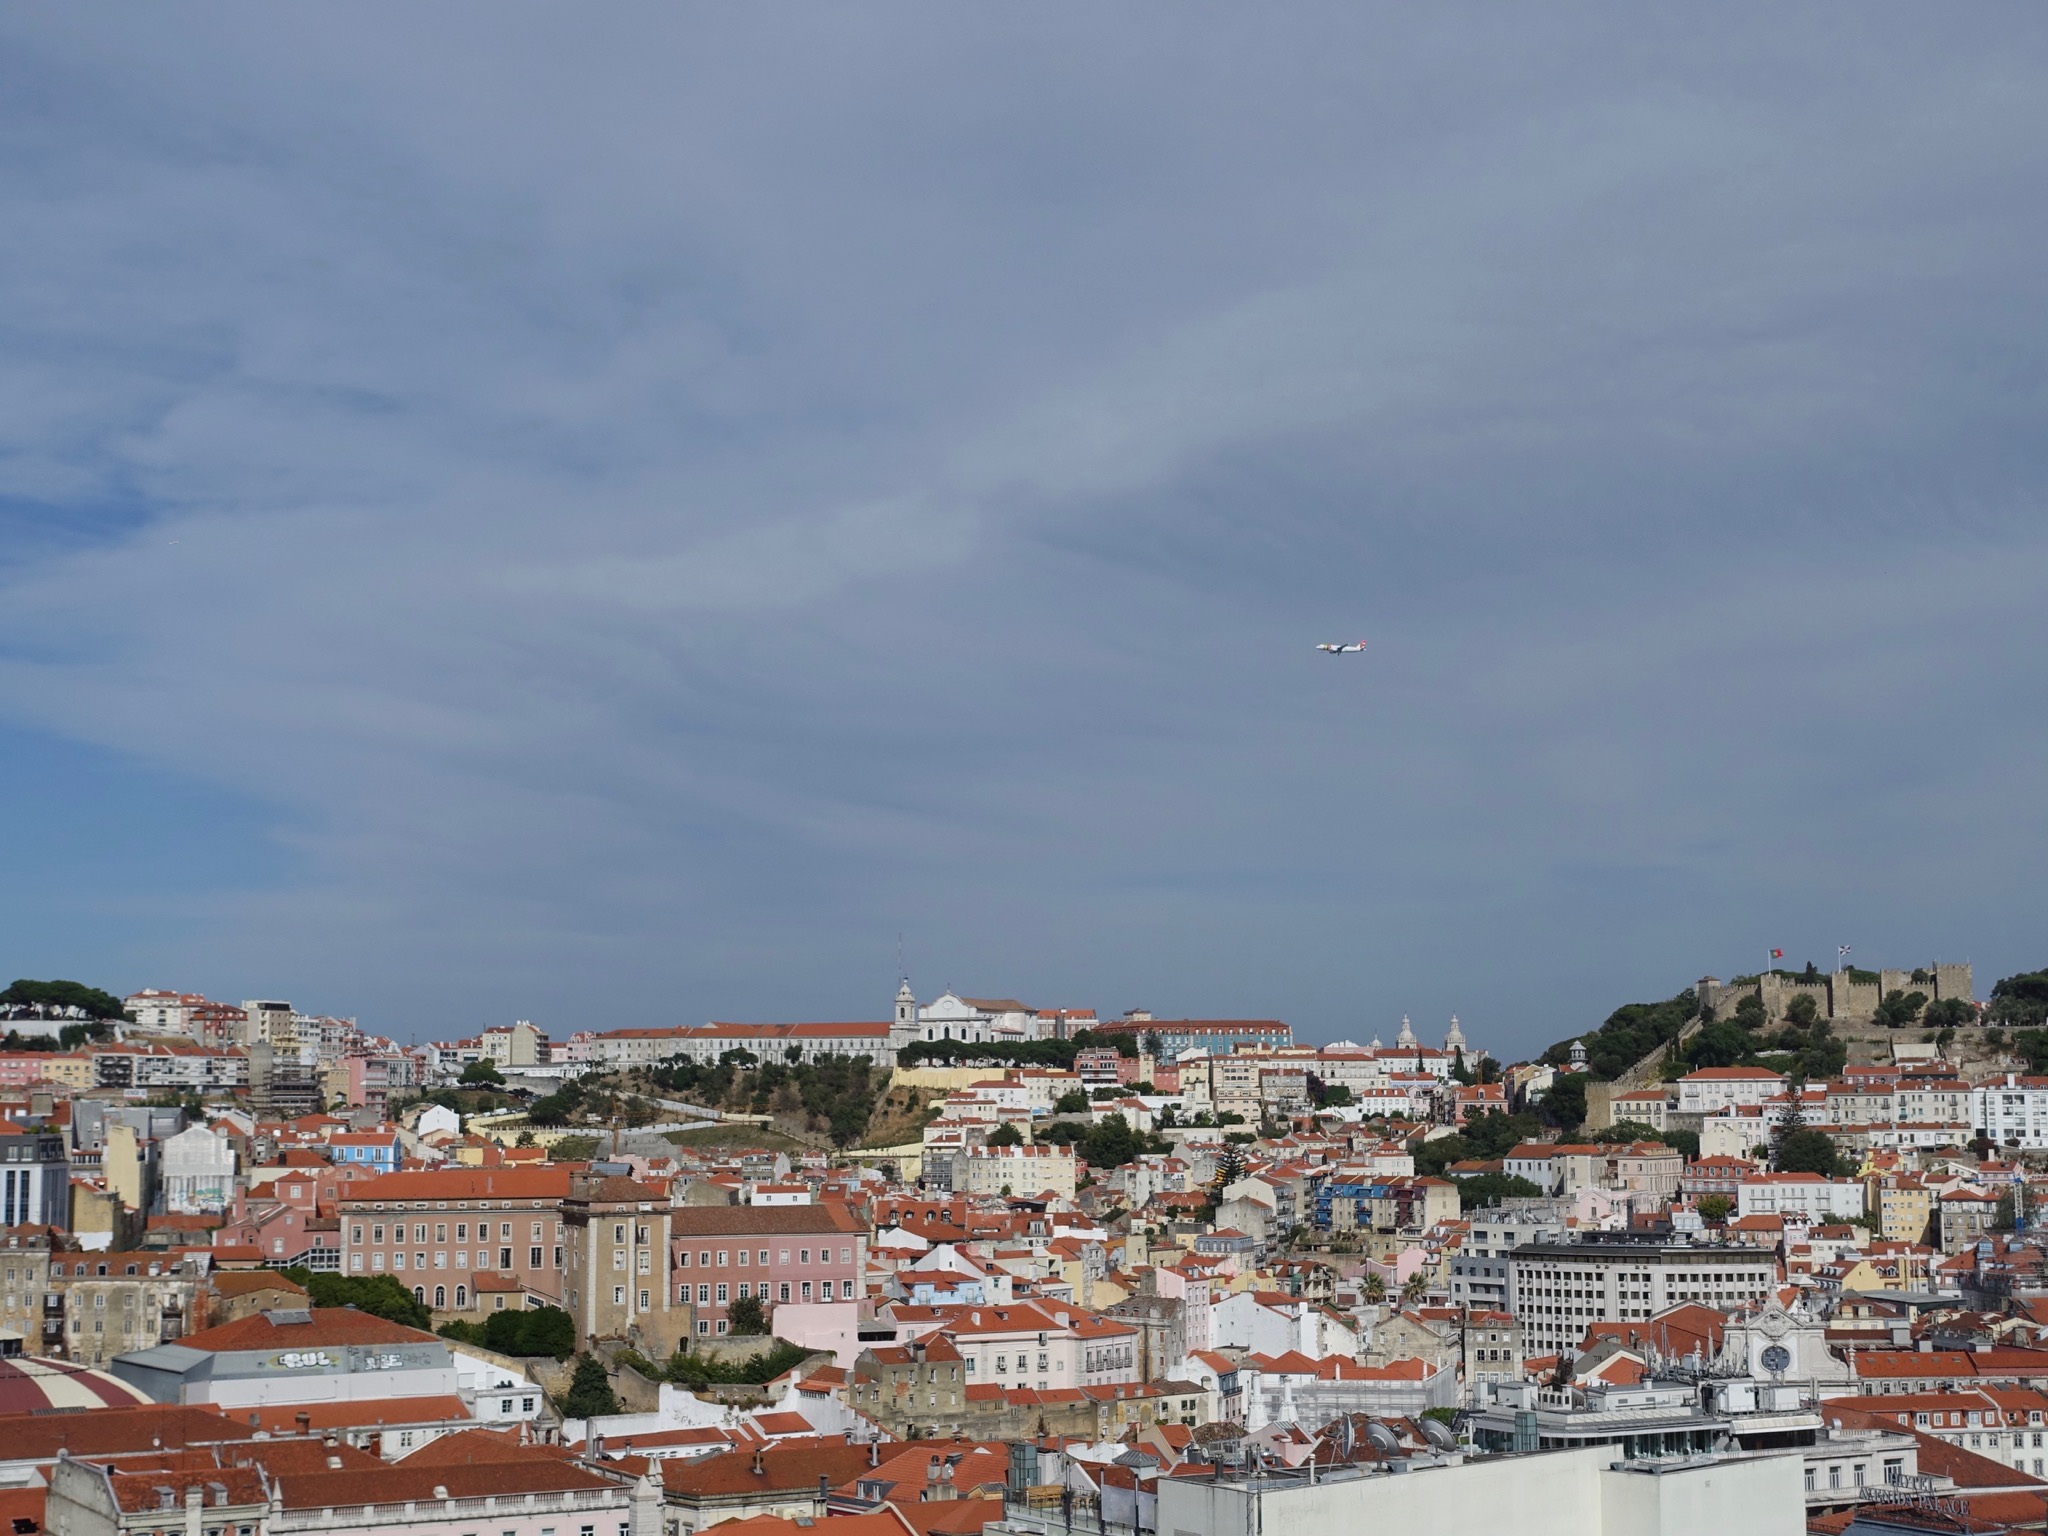 Photo 4 of 86 from the album Highlights Lisbon 2015.